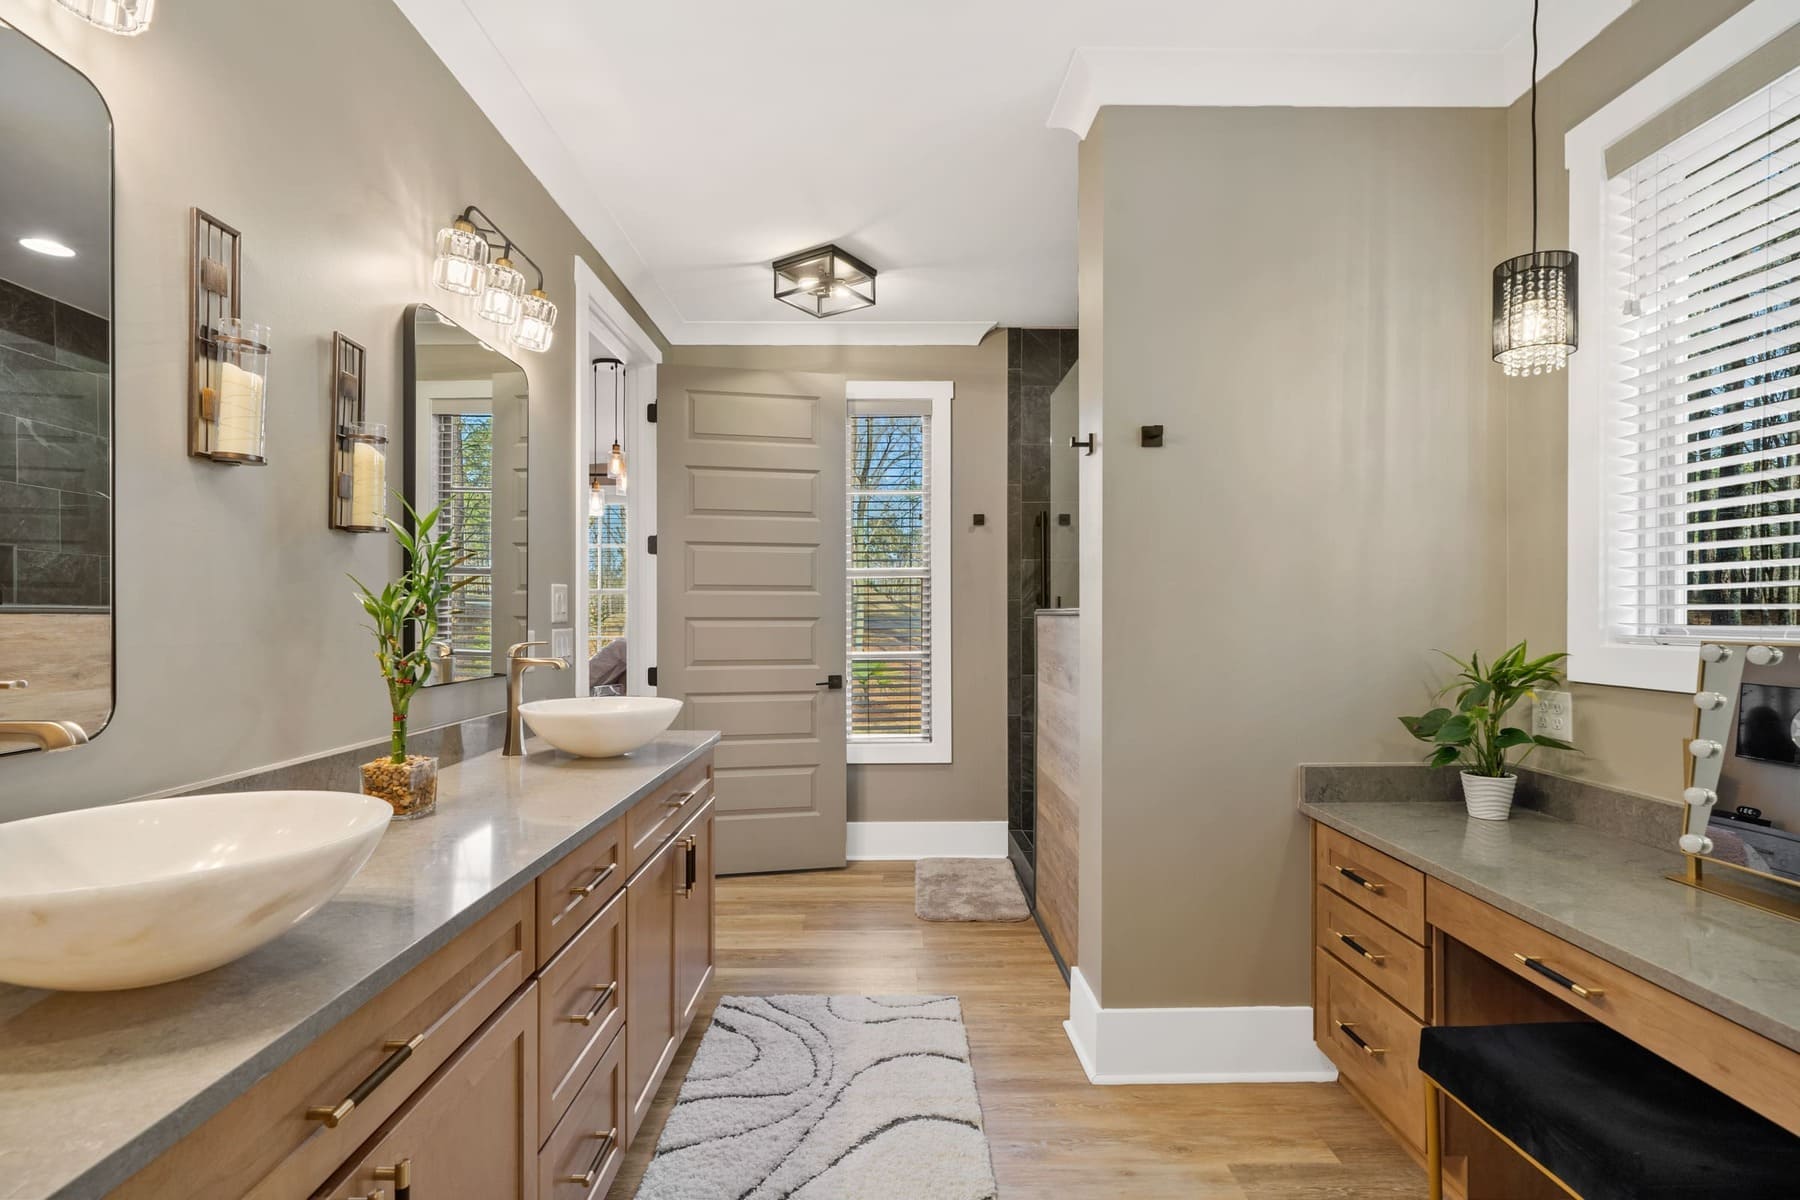 Full View of Master Bath with Makeup Vanity and Double Sink Vanity |PAXISgroup